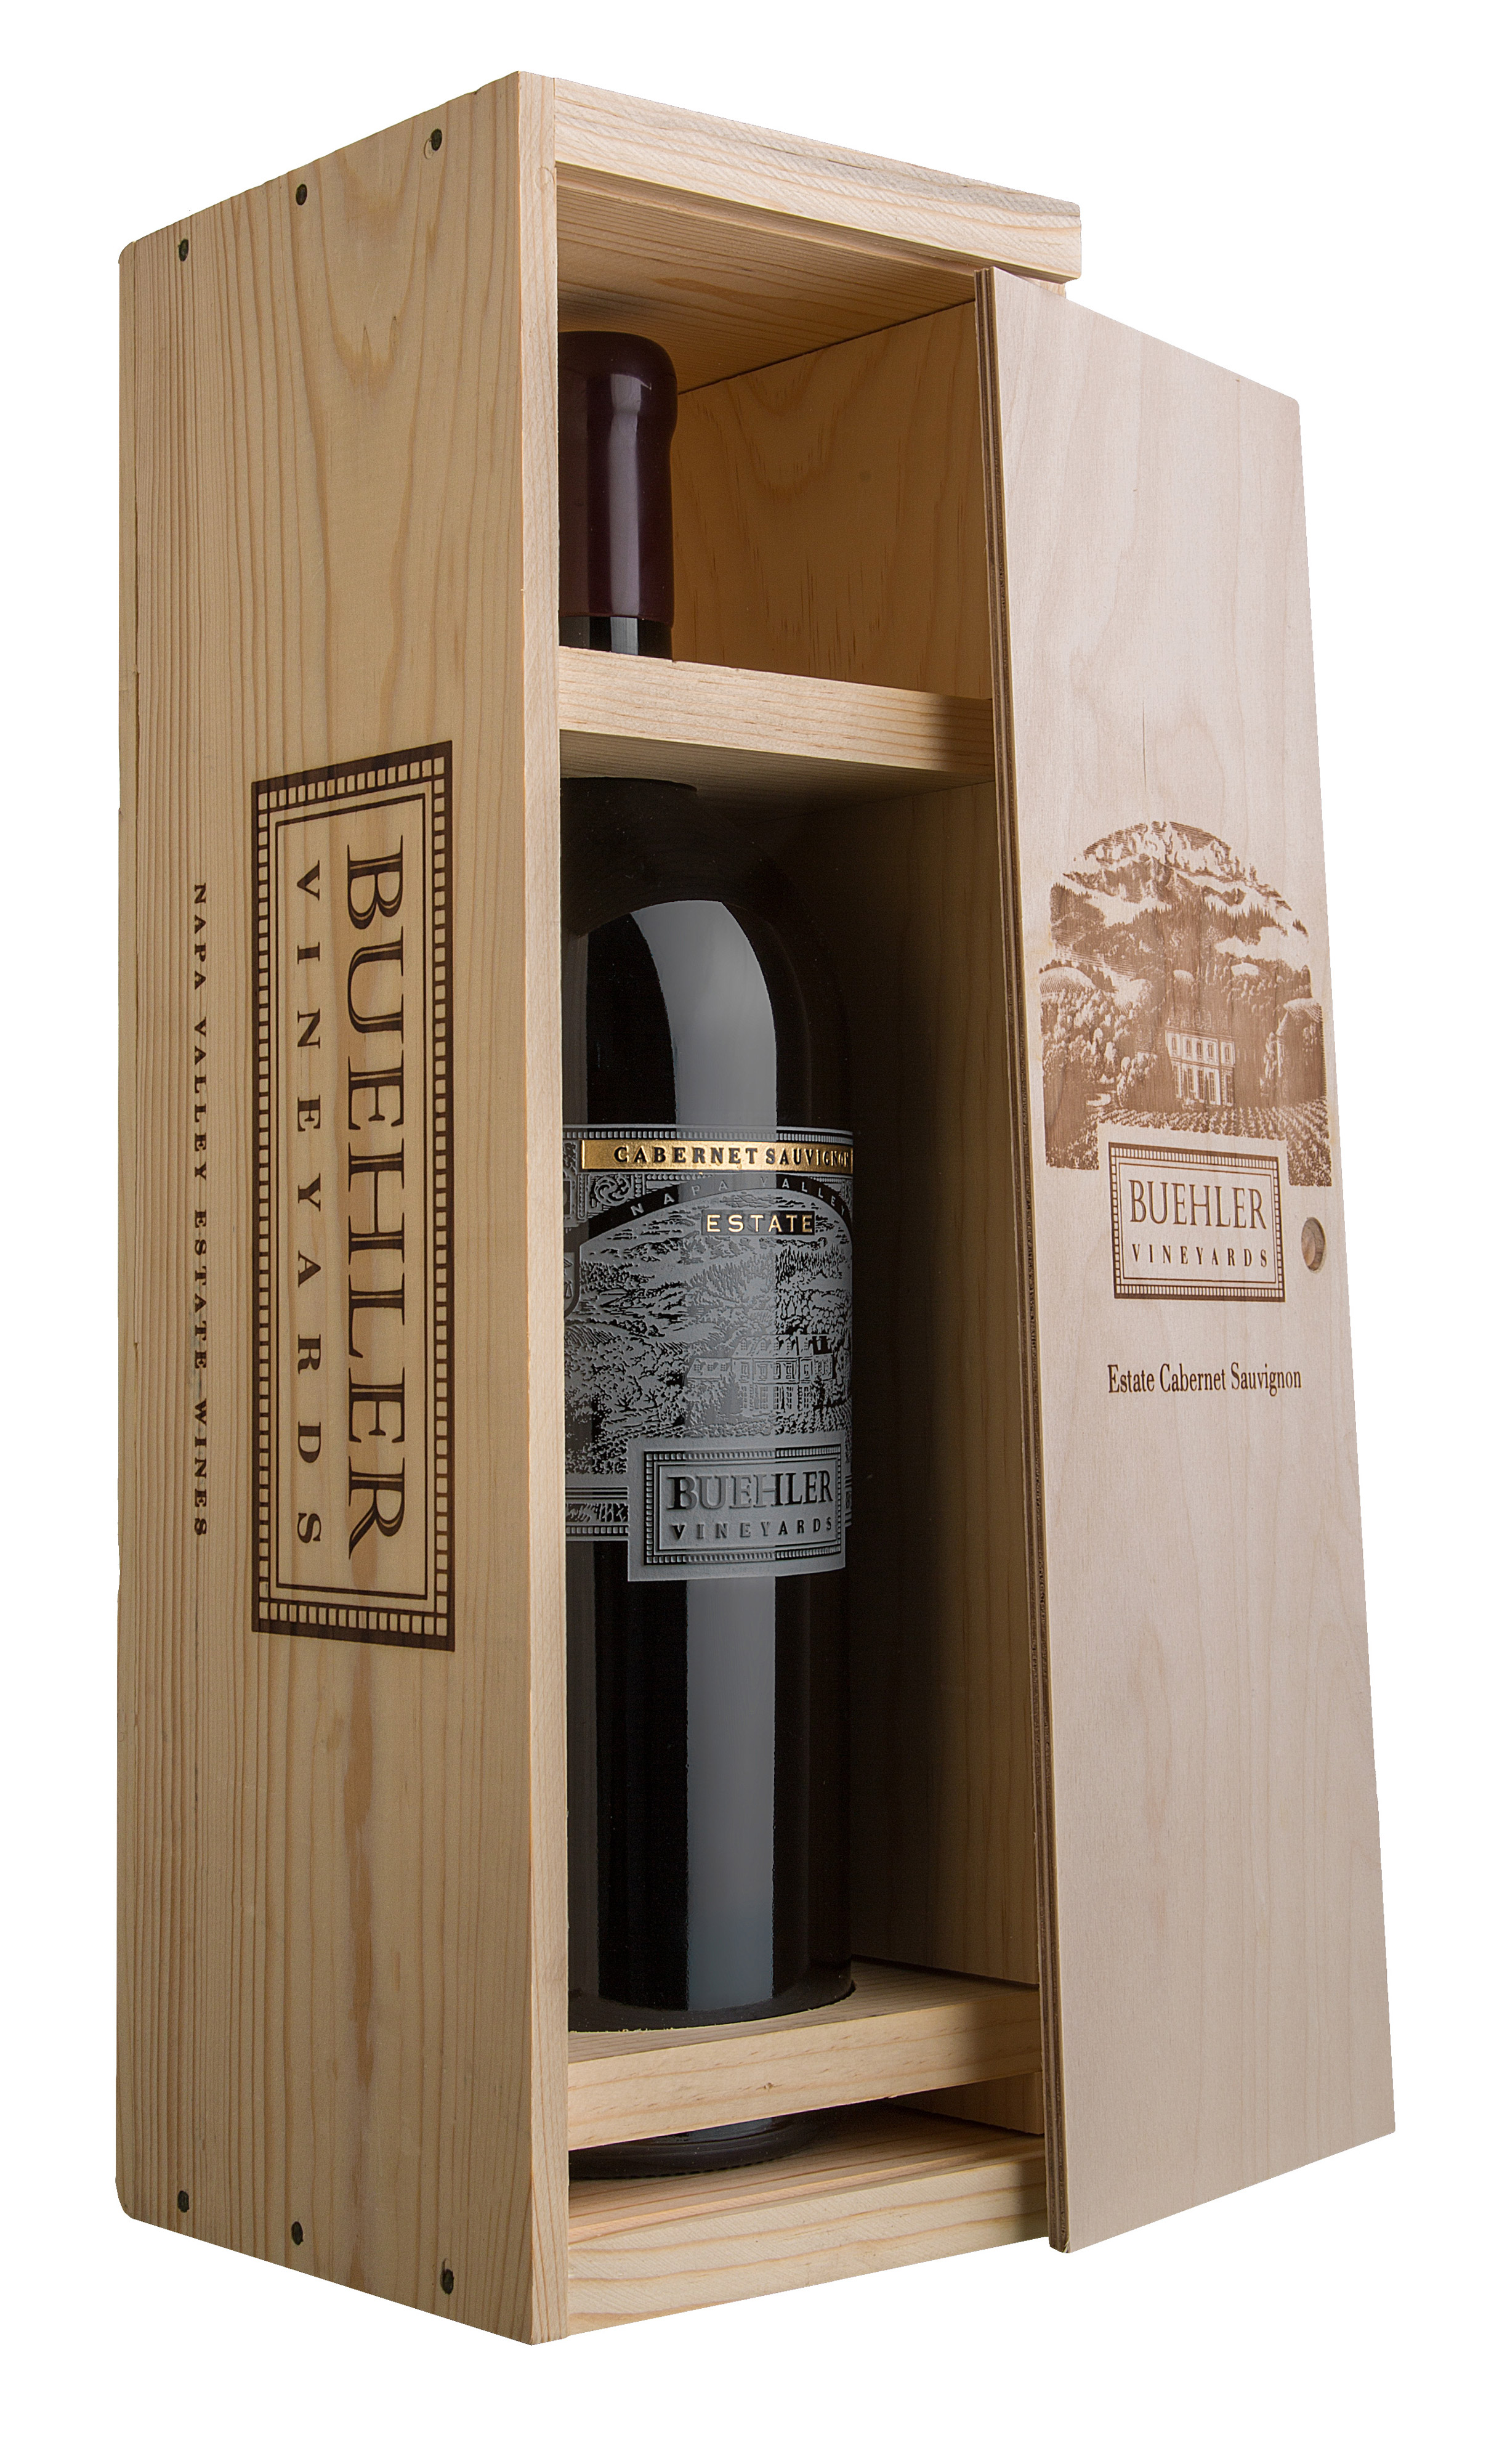 Product Image for ETCHED 3 LITER OF 2020 NAPA CABERNET SAUVIGNON